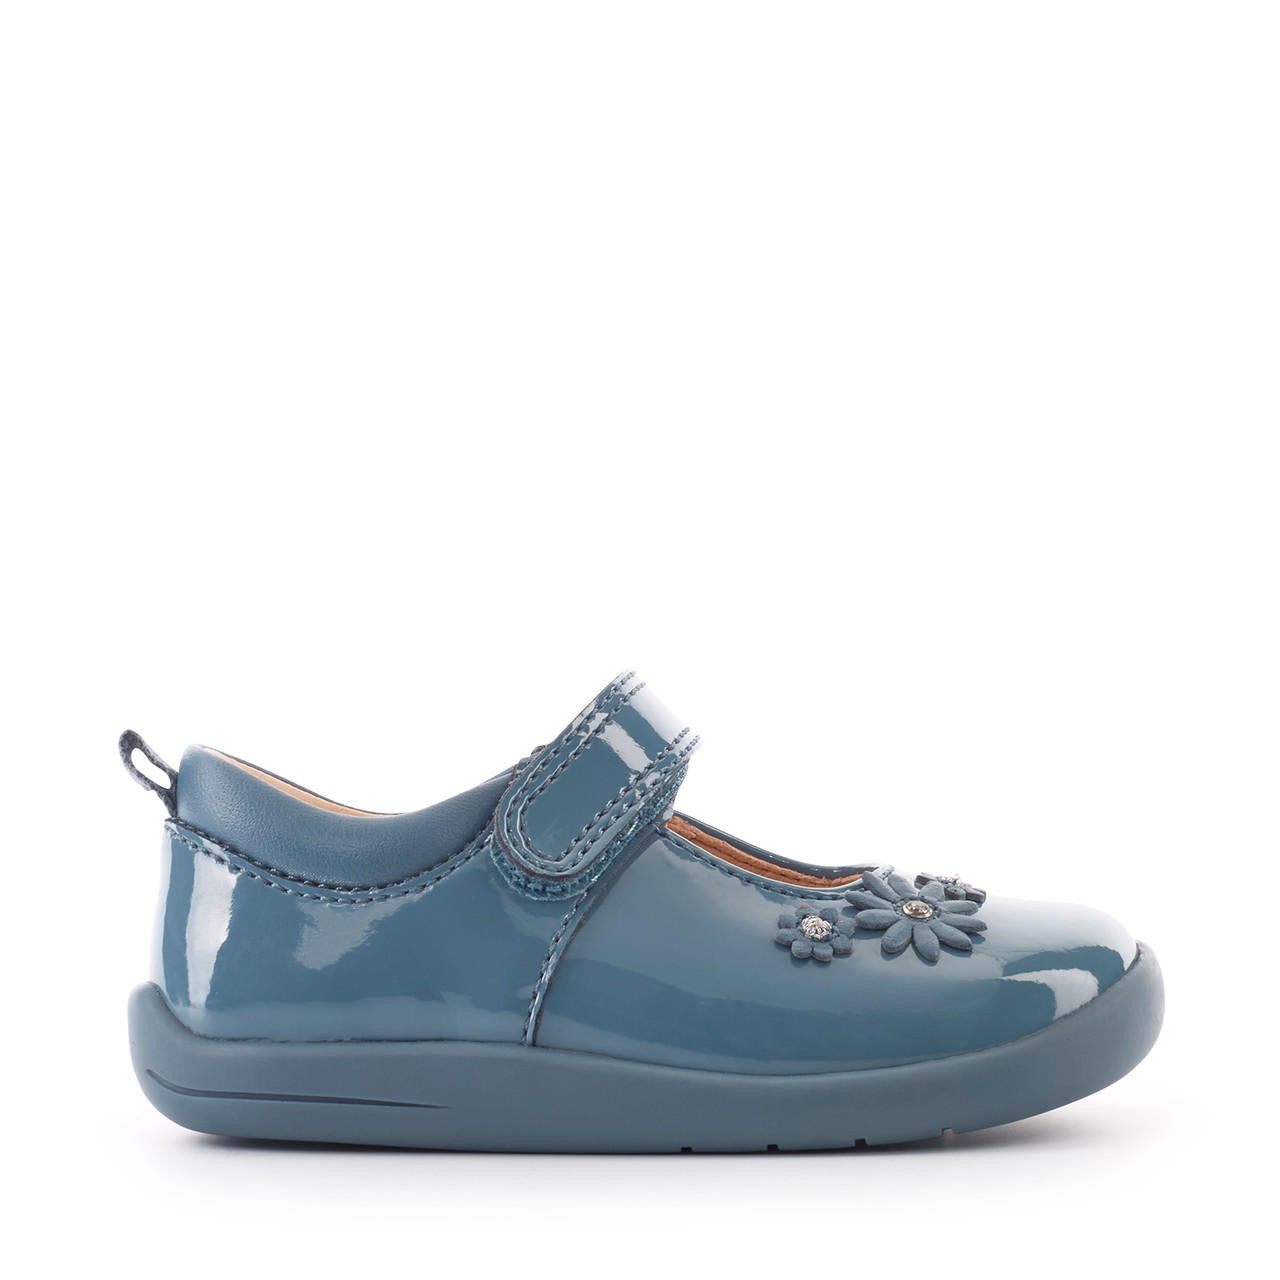 A girls Mary Jane shoe by Start Rite, style Fairy Tale, in pale blue patent with velcro fastening. Right side view.